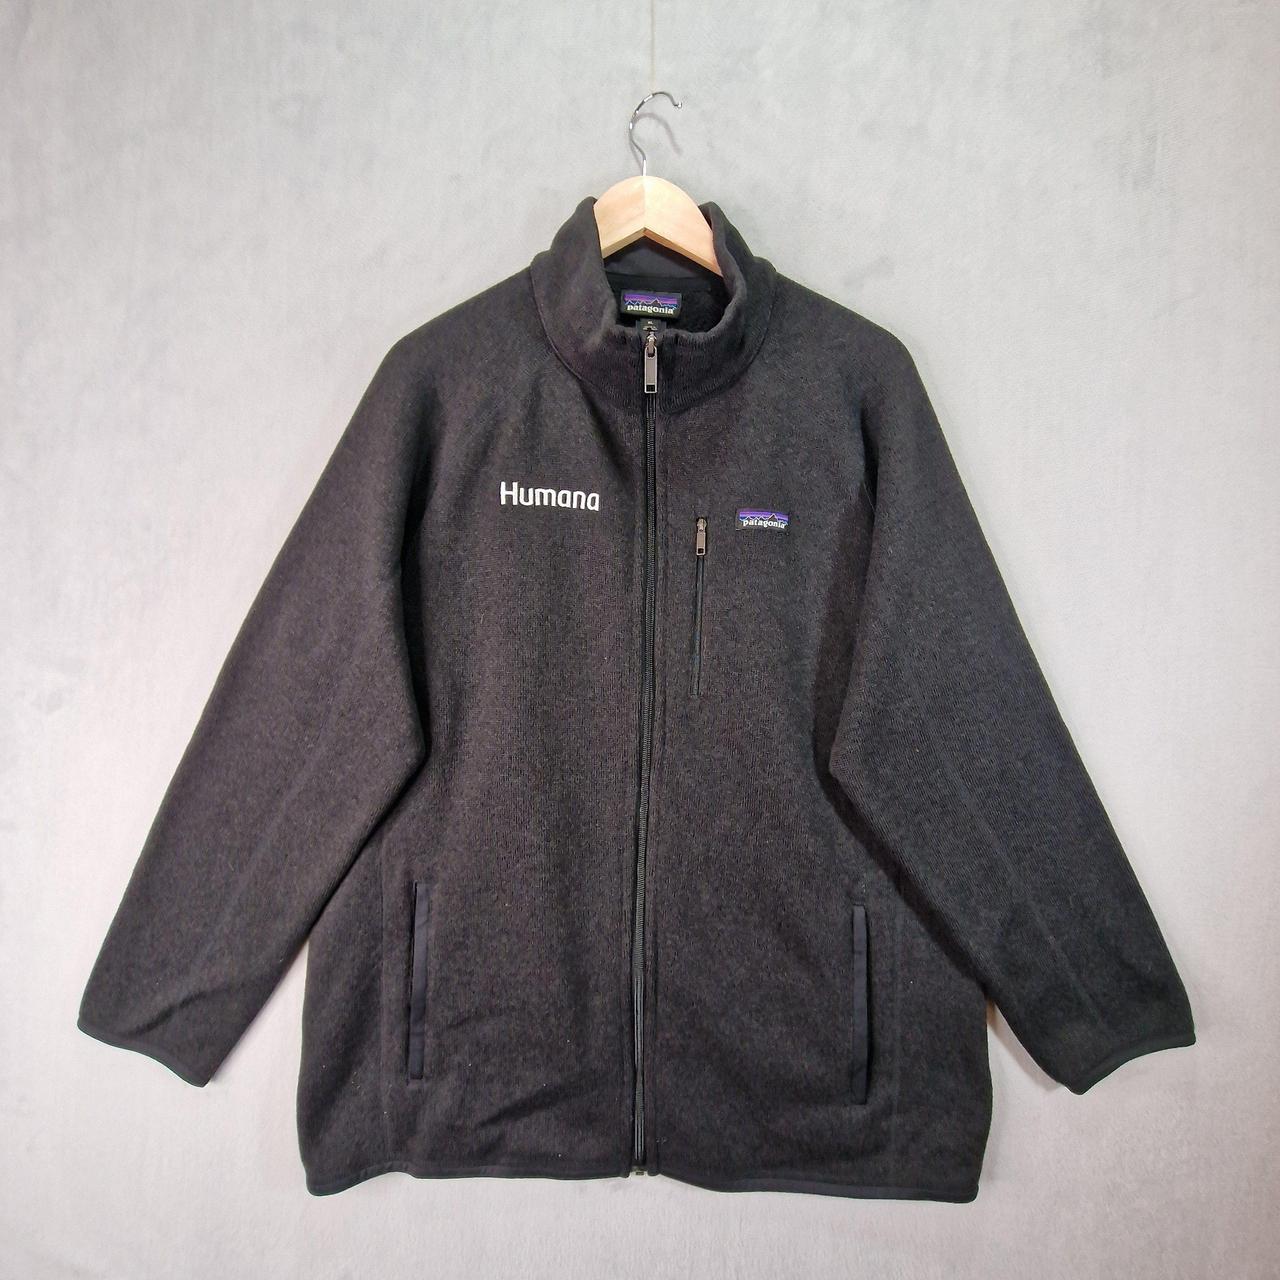 Patagonia Better Sweater Jacket Mens XL Extra Large... - Depop